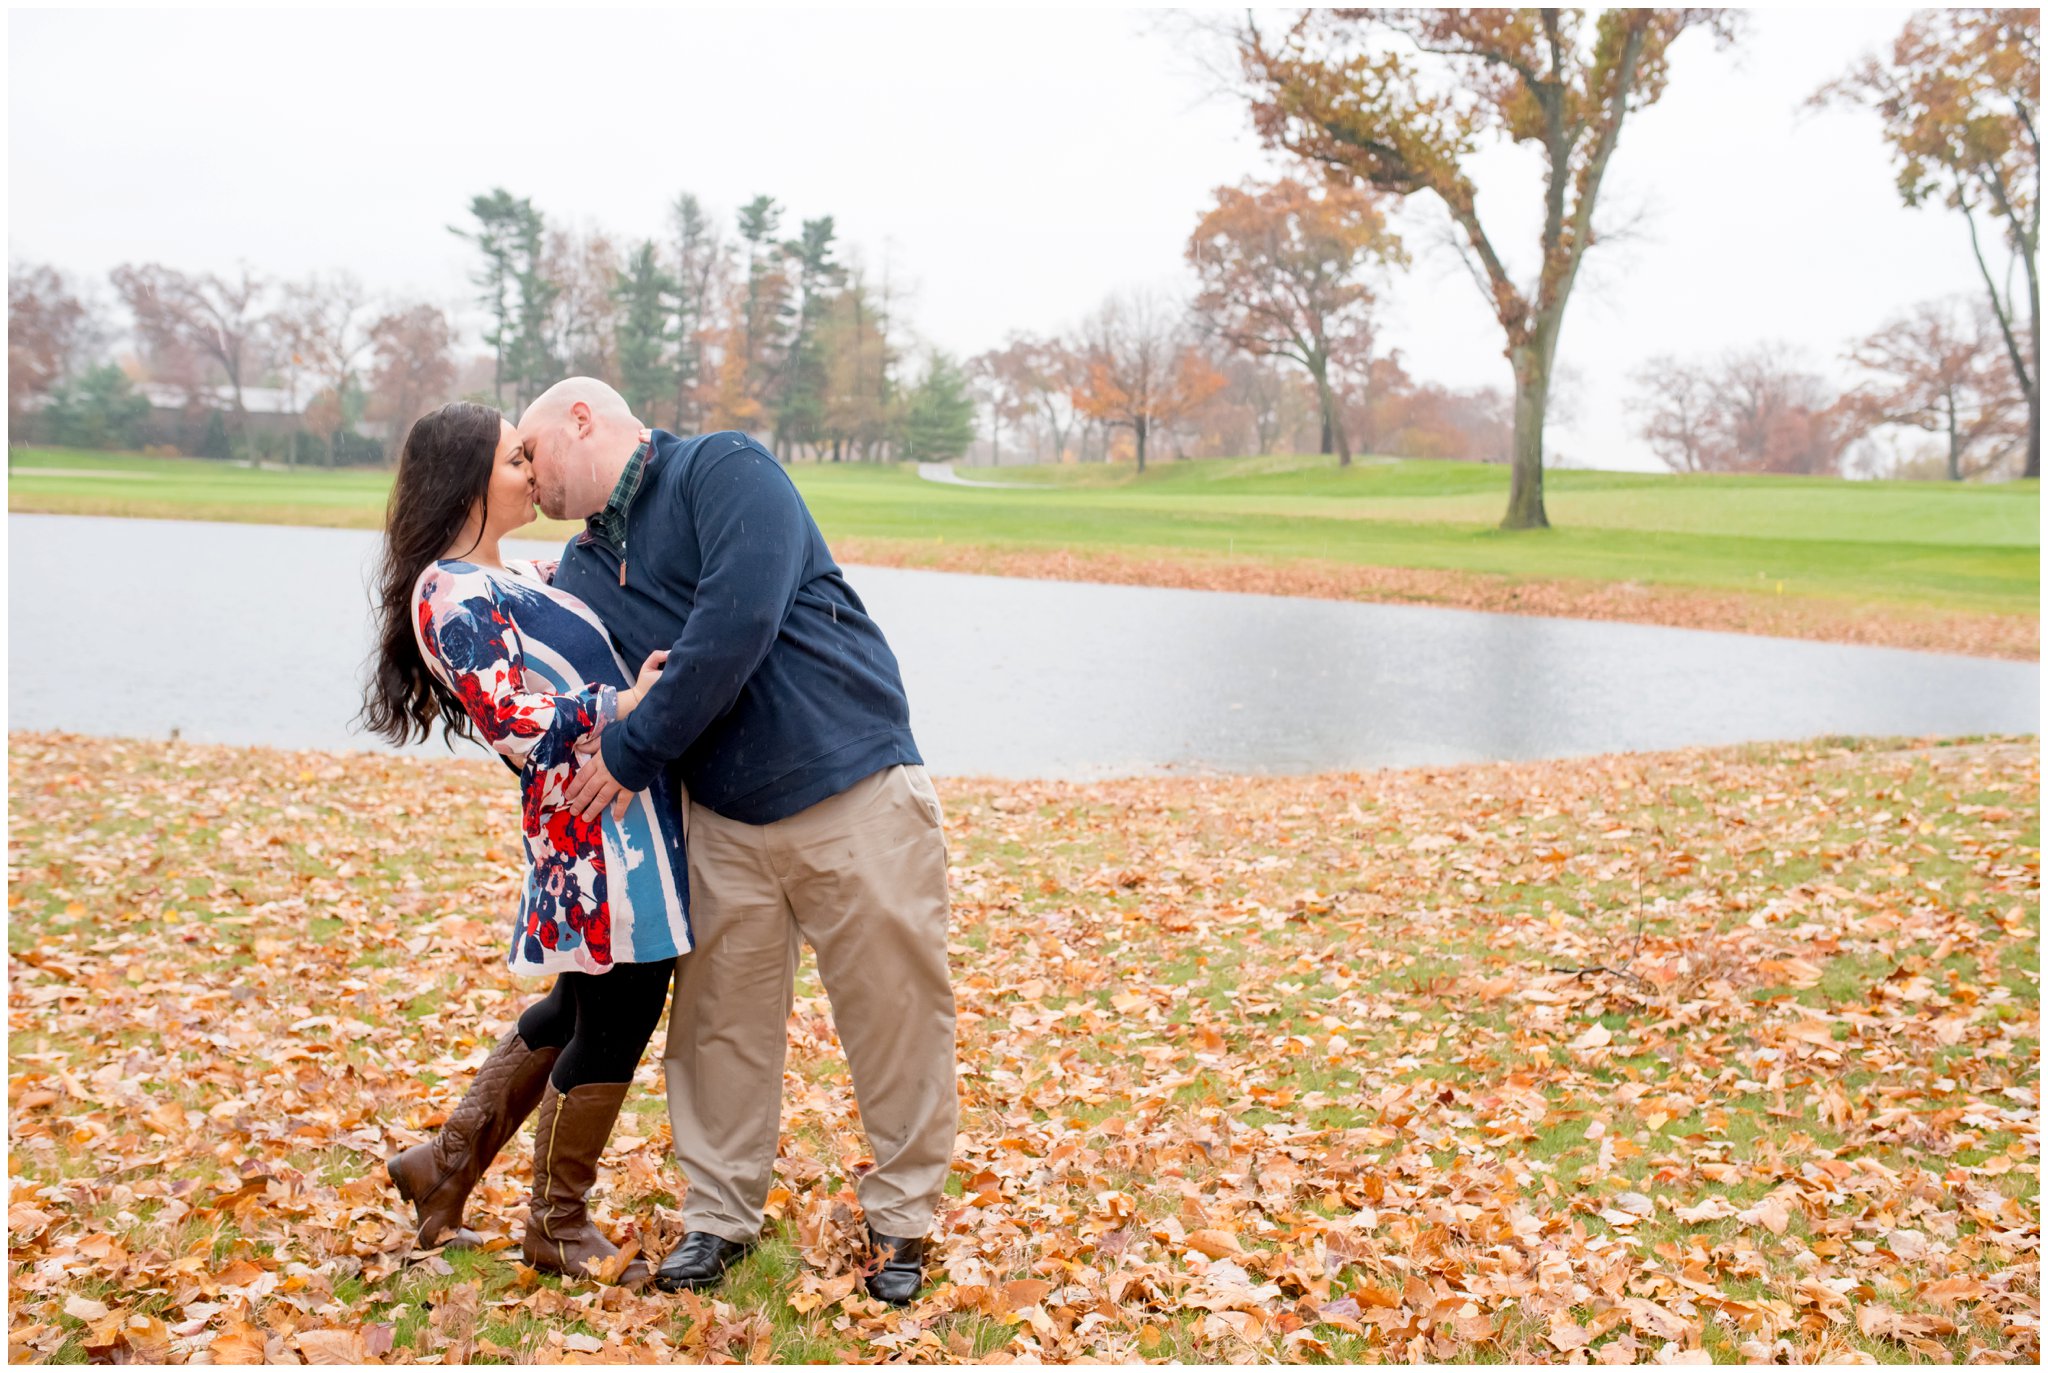 Laura Lee Photography_ Best of 2015 Engagements_0018